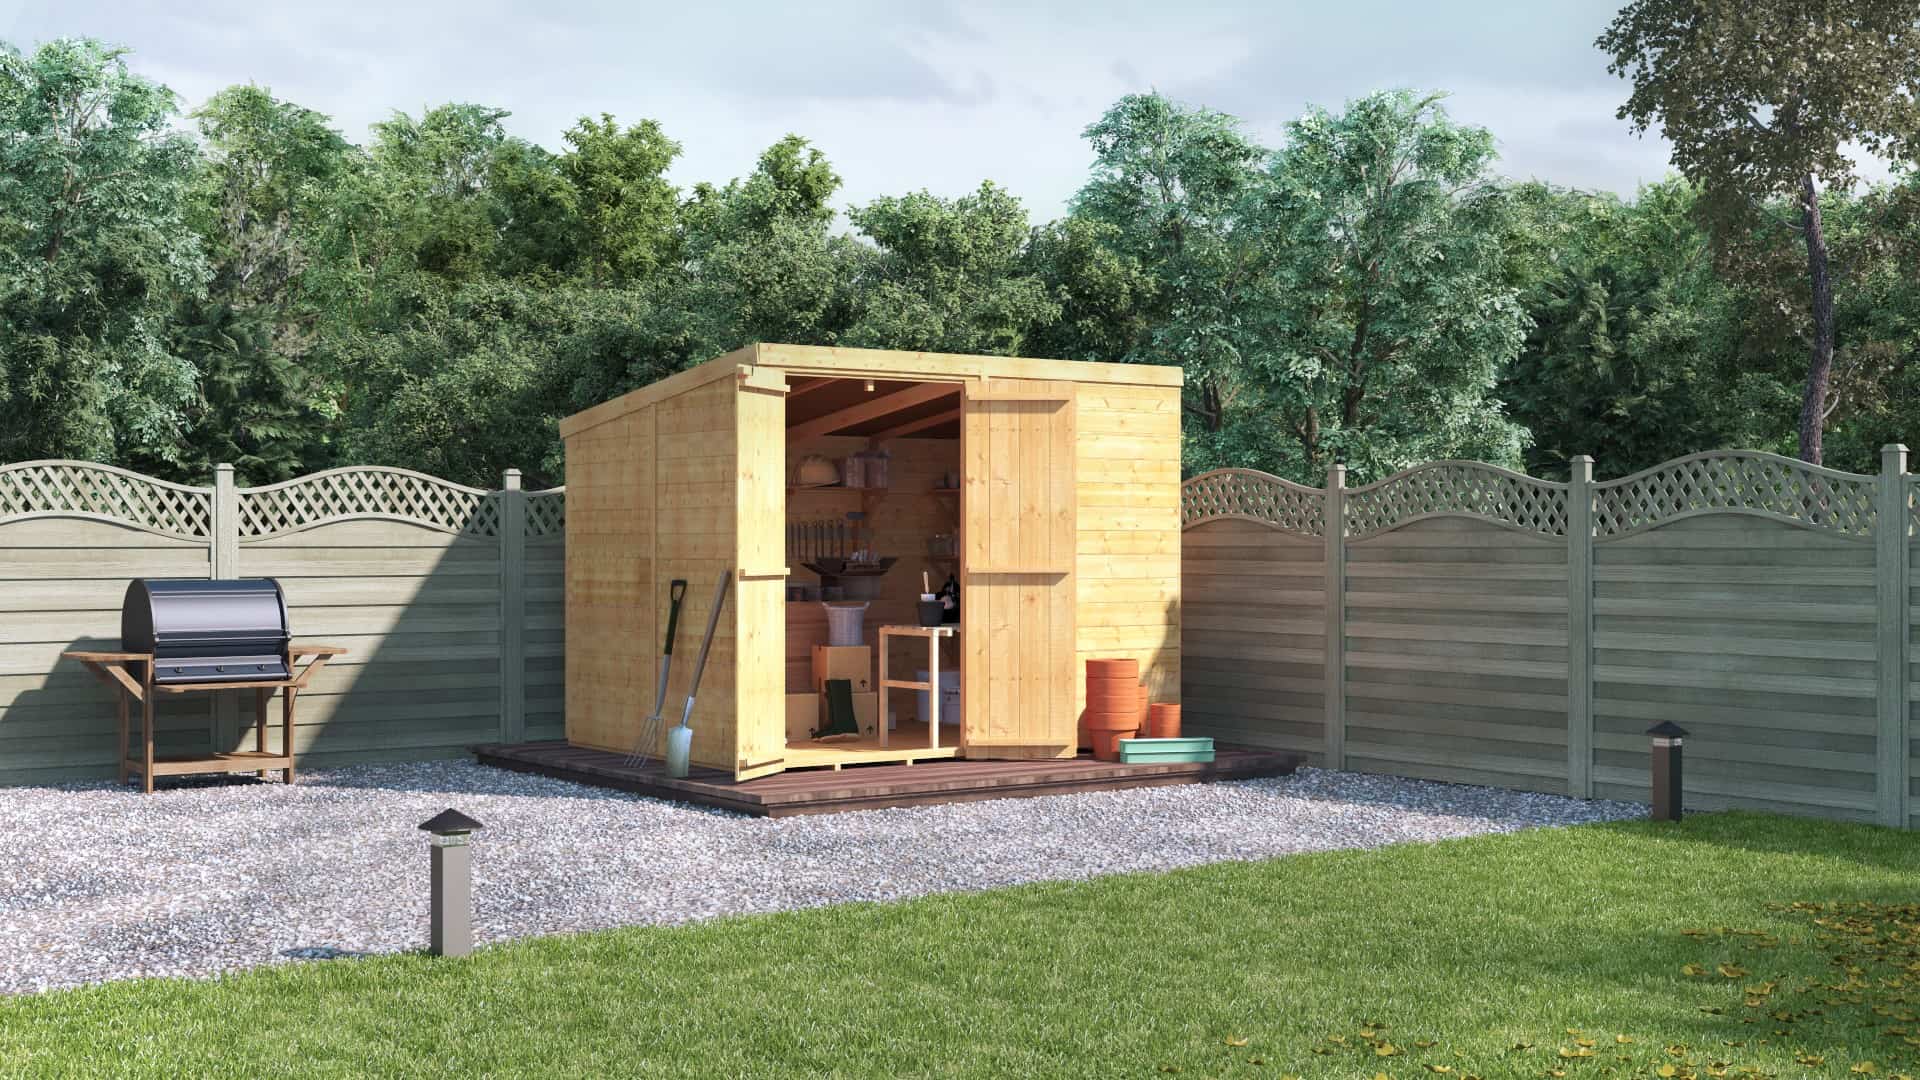 opened-doored Windowless pent tongue and groove timber shed on gravel against a fence boundary backed by trees